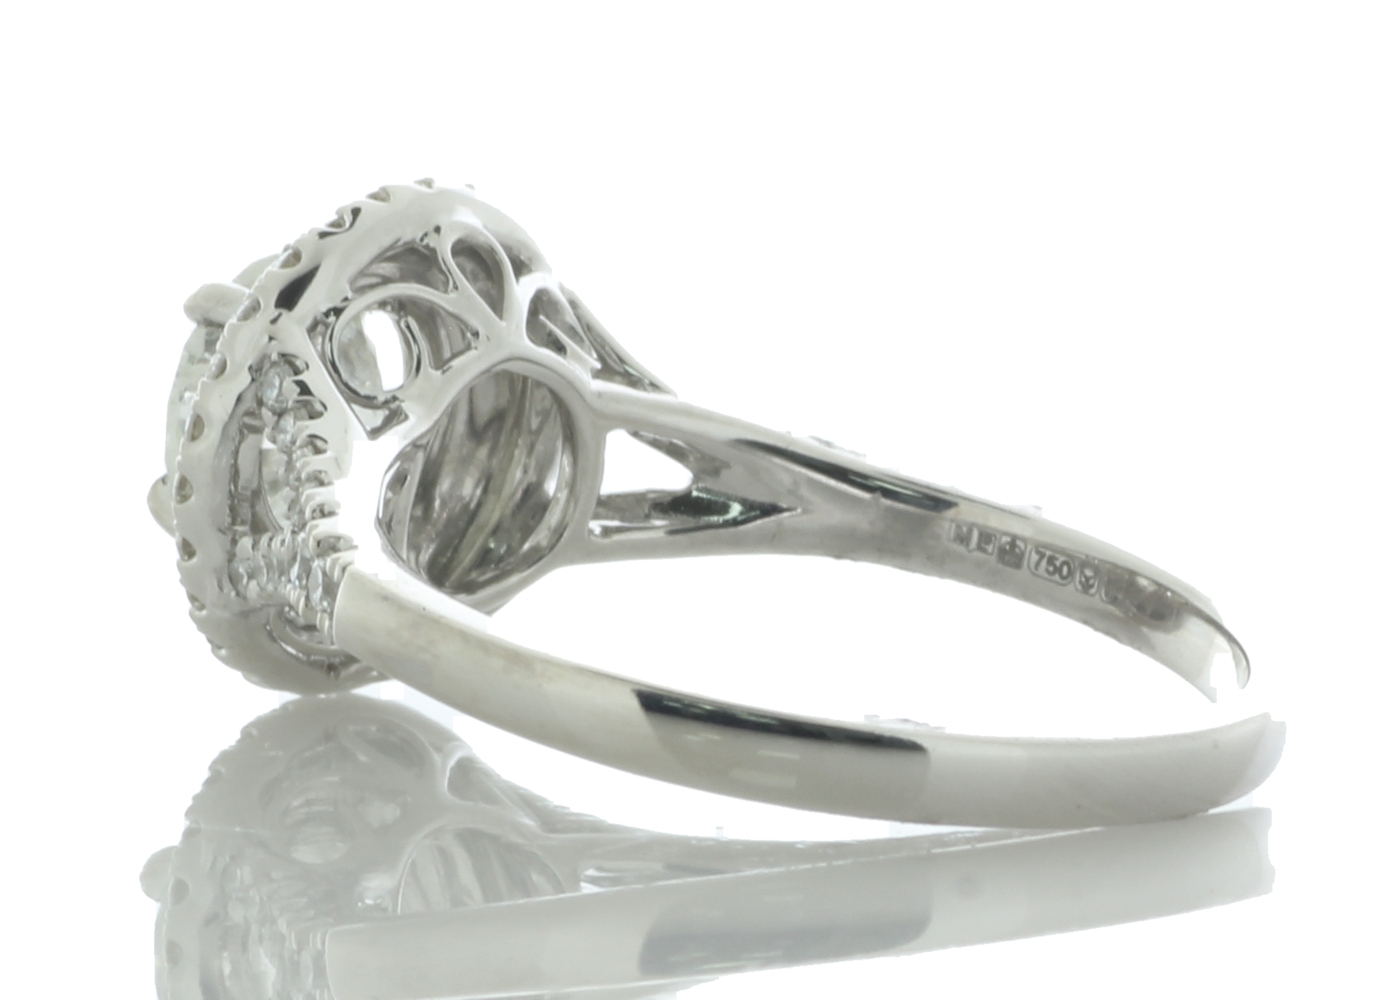 18ct White Gold Single Stone With Halo Setting Ring (0.86) 1.21 Carats - Image 3 of 5